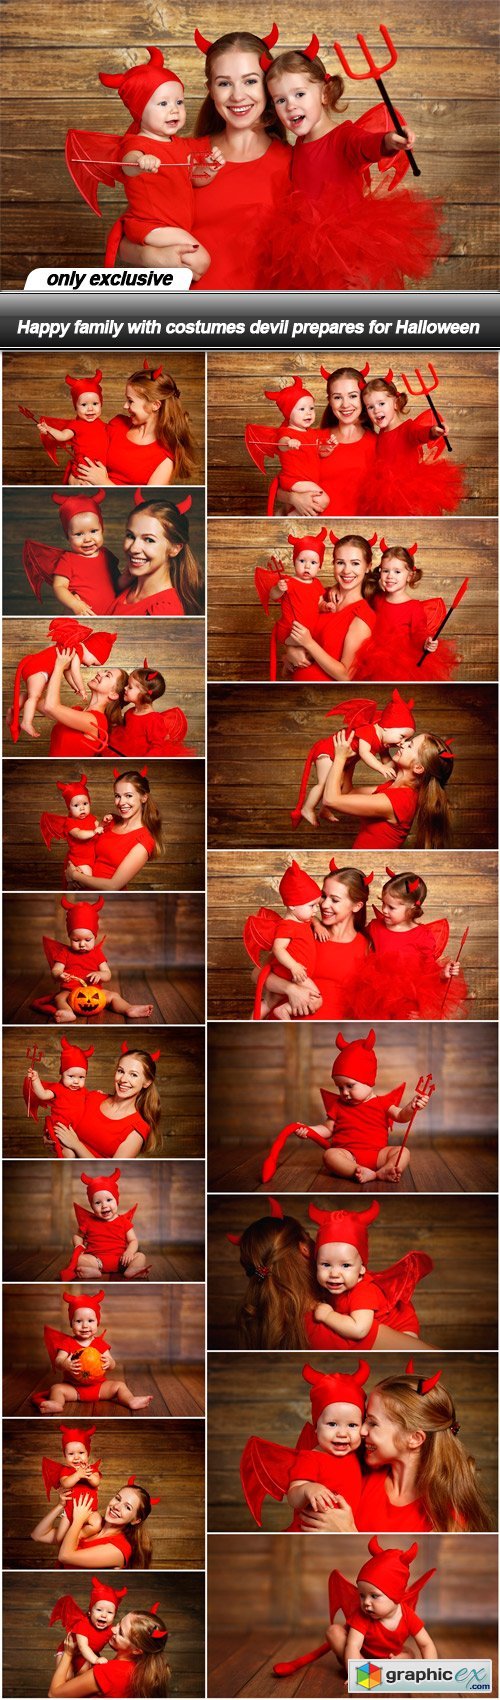 Happy family with costumes devil prepares for Halloween - 18 UHQ JPEG